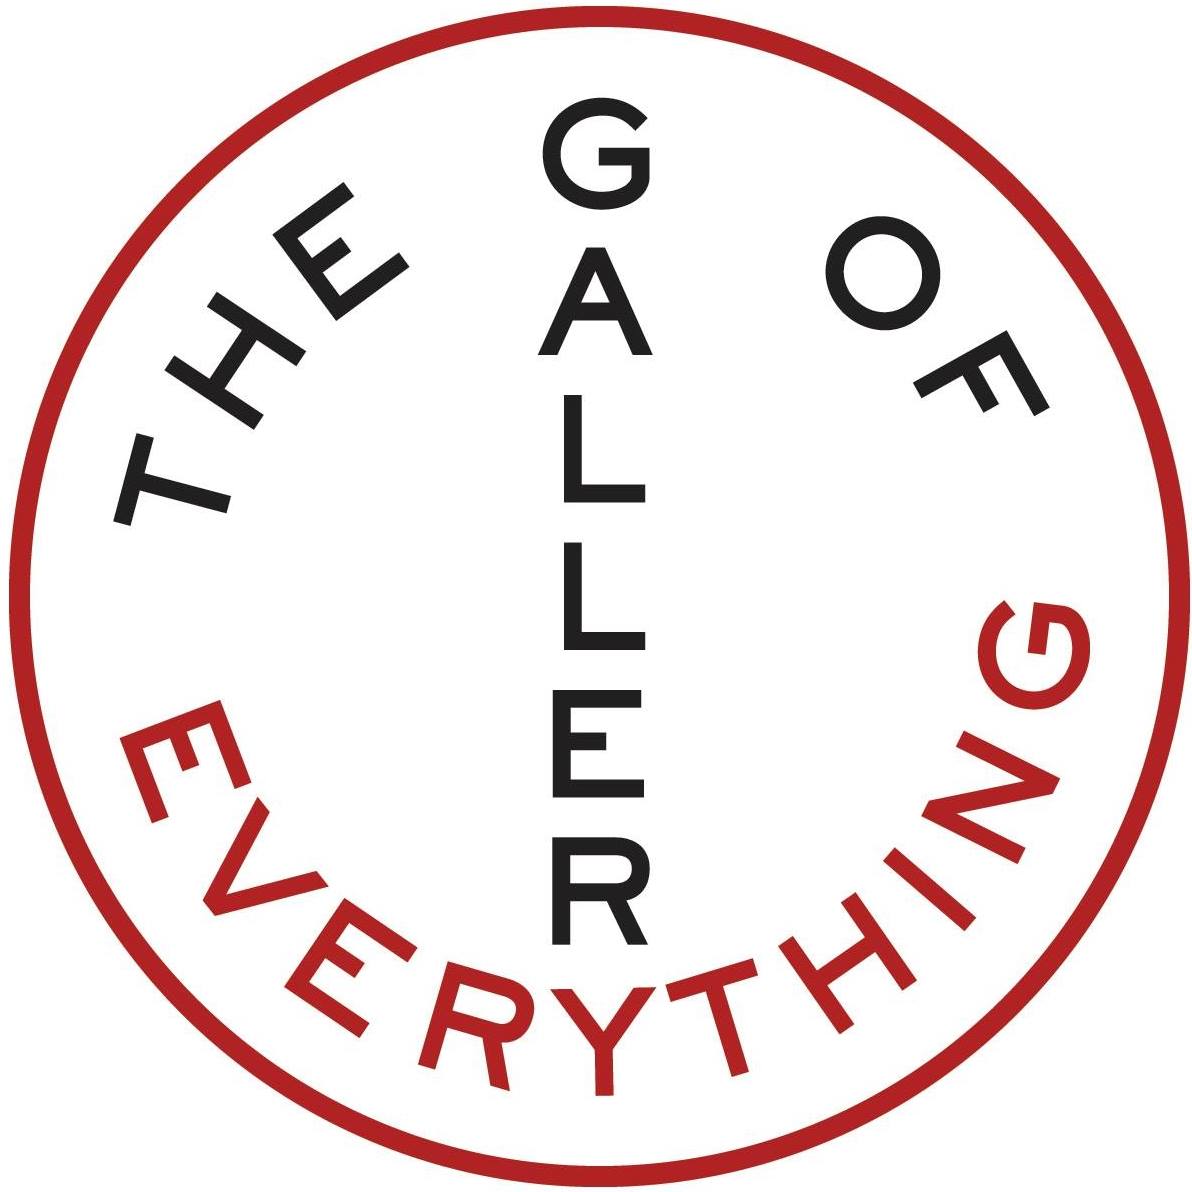 THE GALLERY OF EVERYTHING 